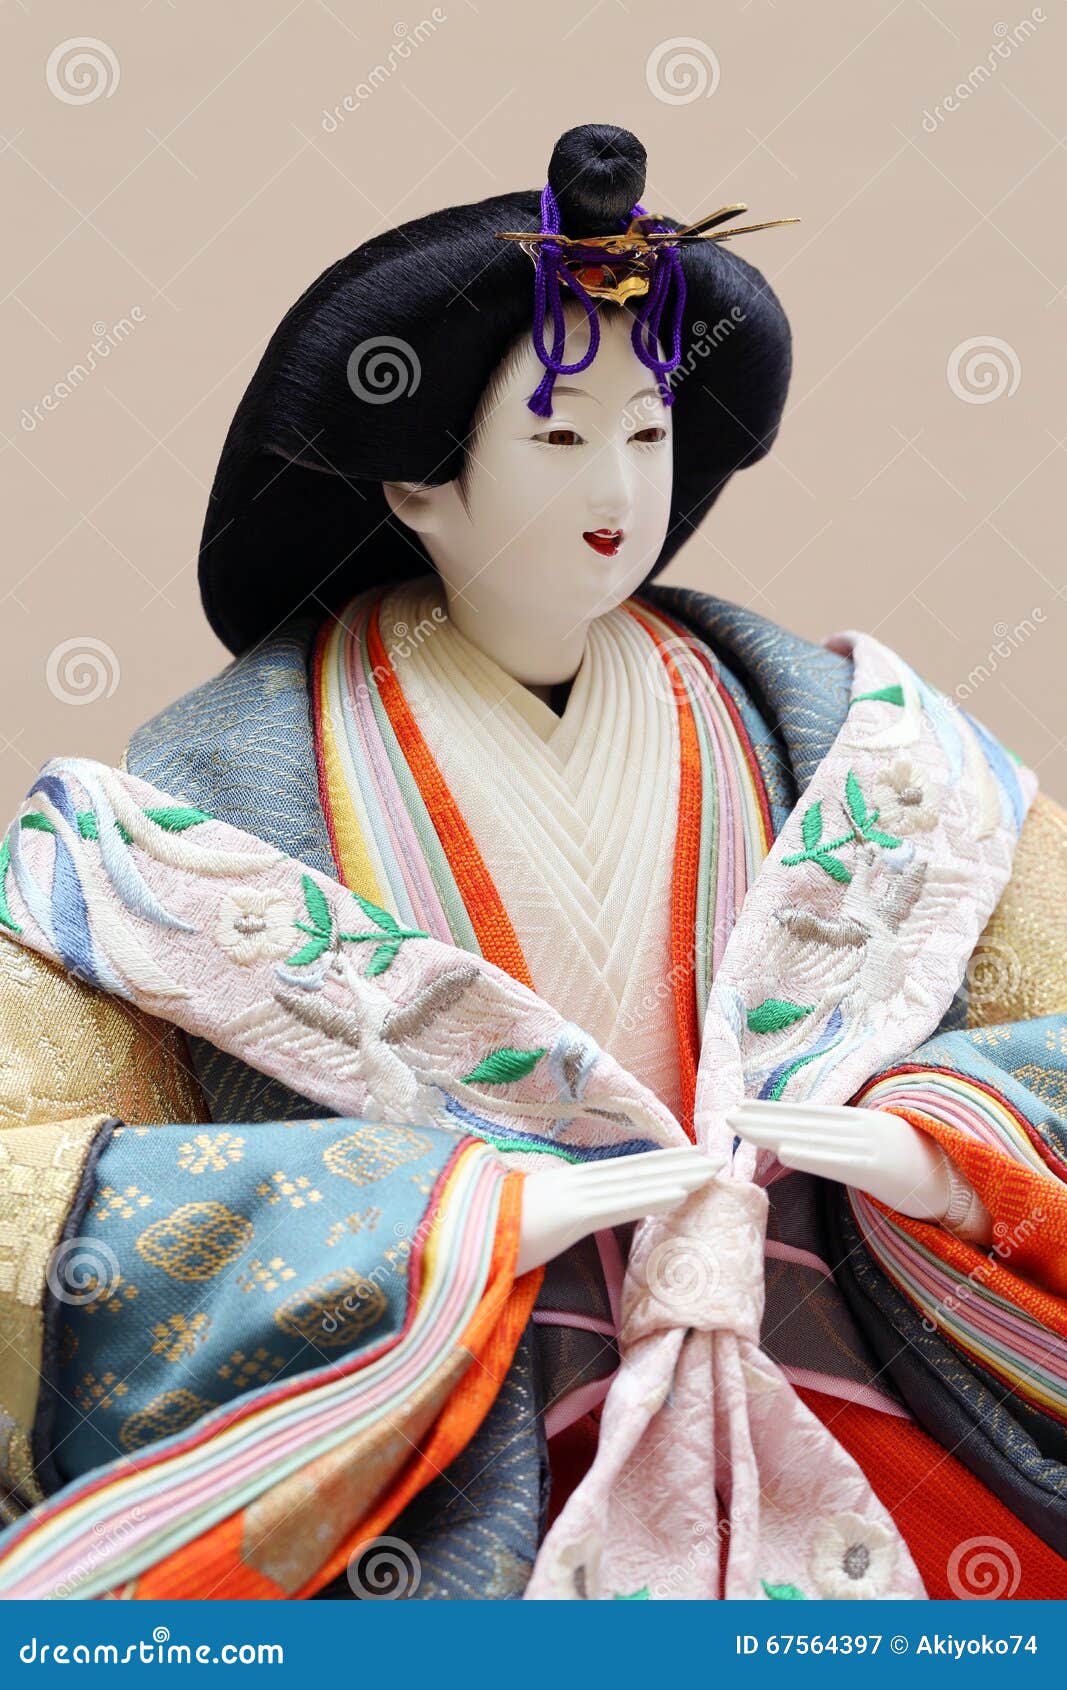 Traditional Japanese doll stock image. Image of hairpin - 67564397